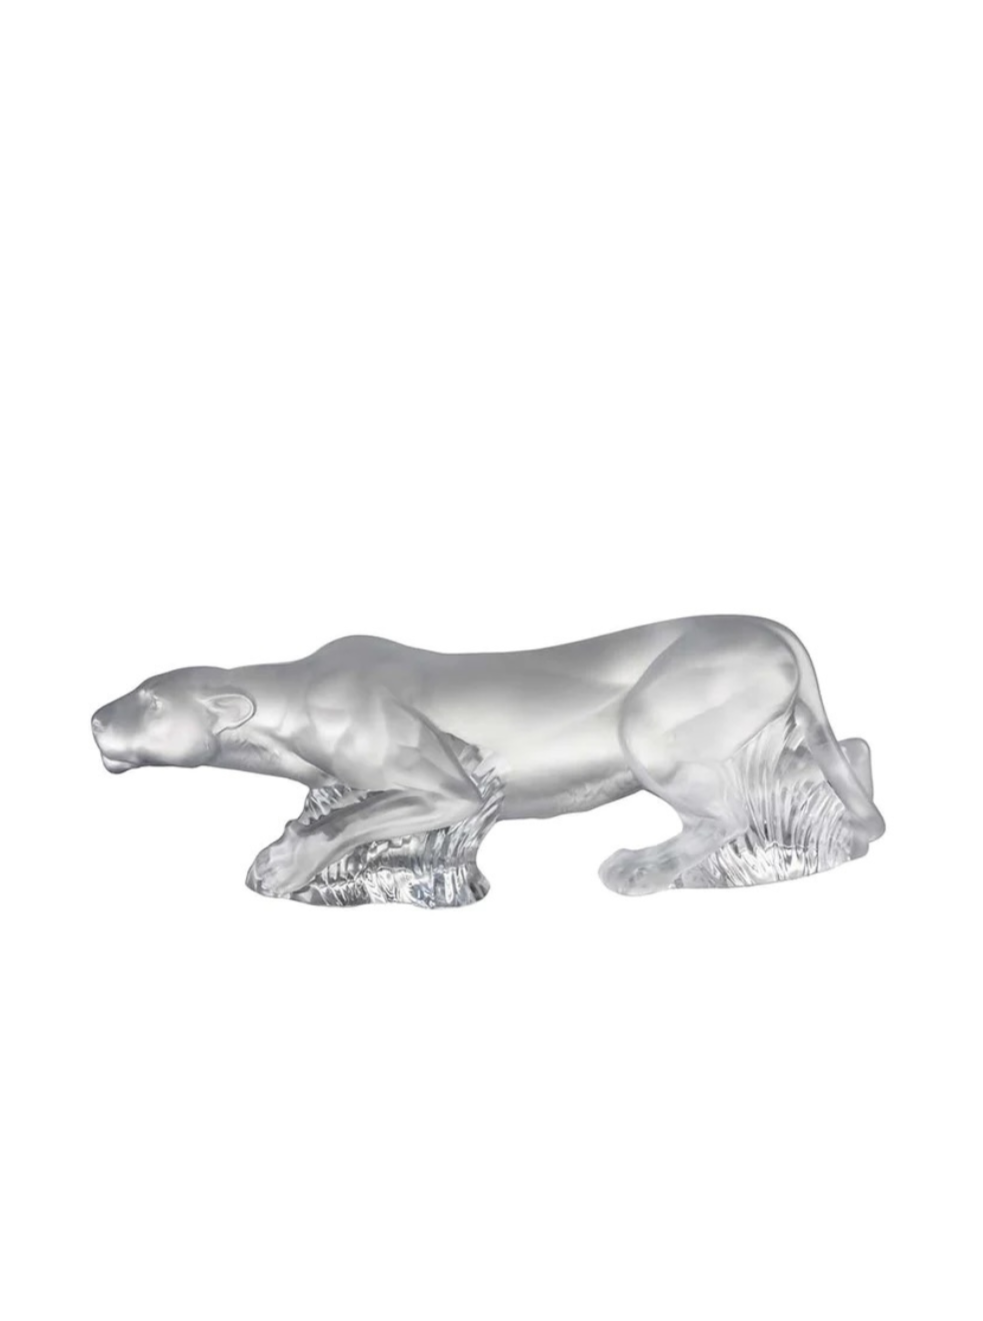 LION TIMBAVATI LIONESS  SCULPTURE CLEAR LIMITED EDITION